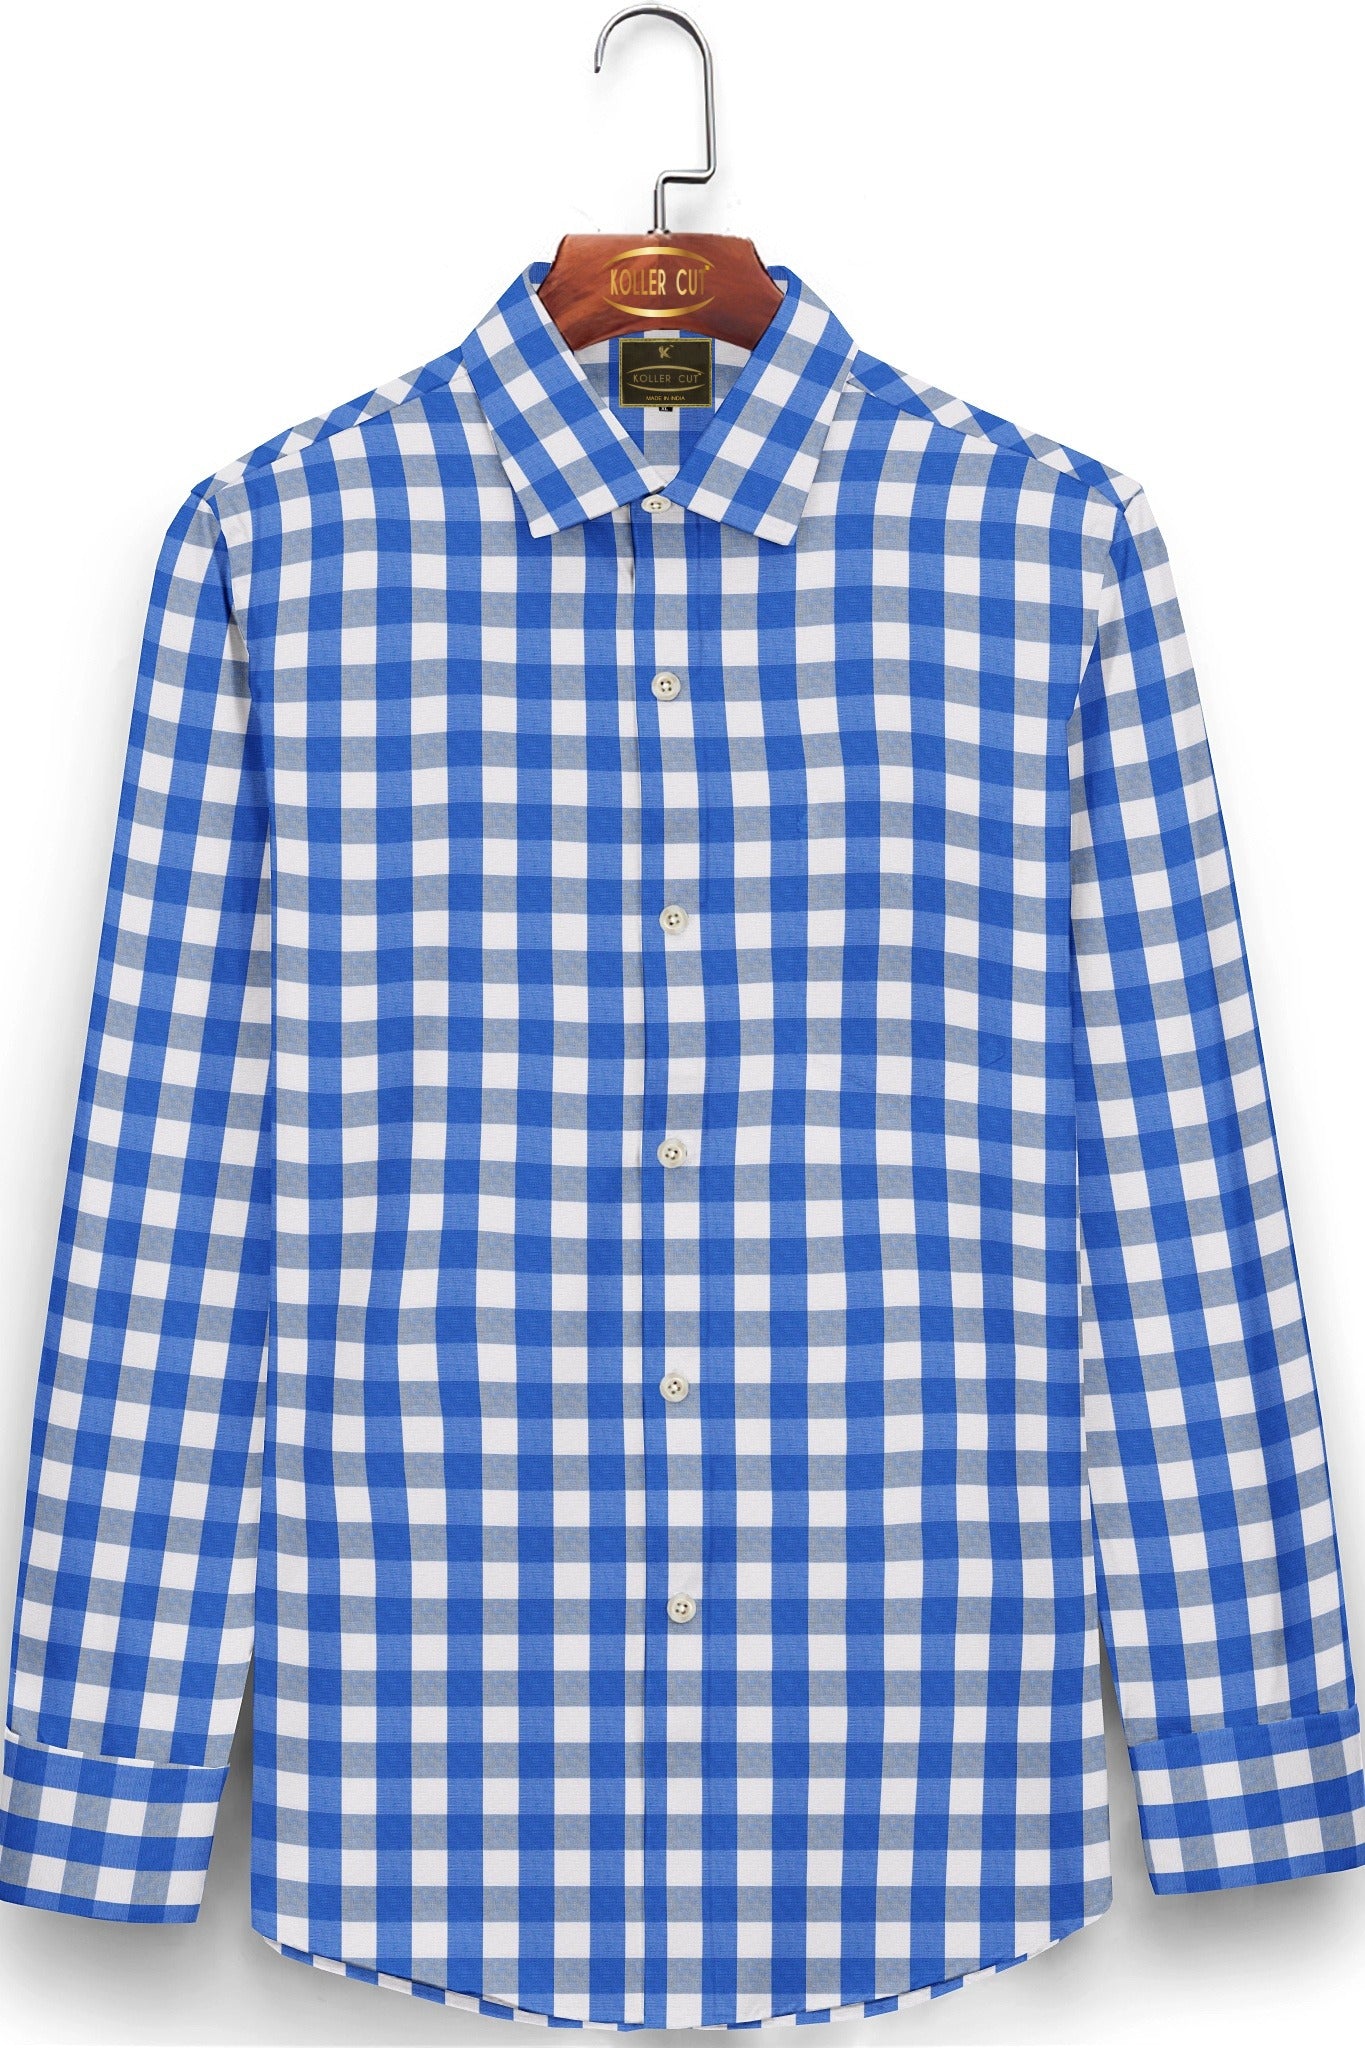 Cerulean Blue with Dazzled Blue and Glaucous Blue Gingham Cotton Shirt